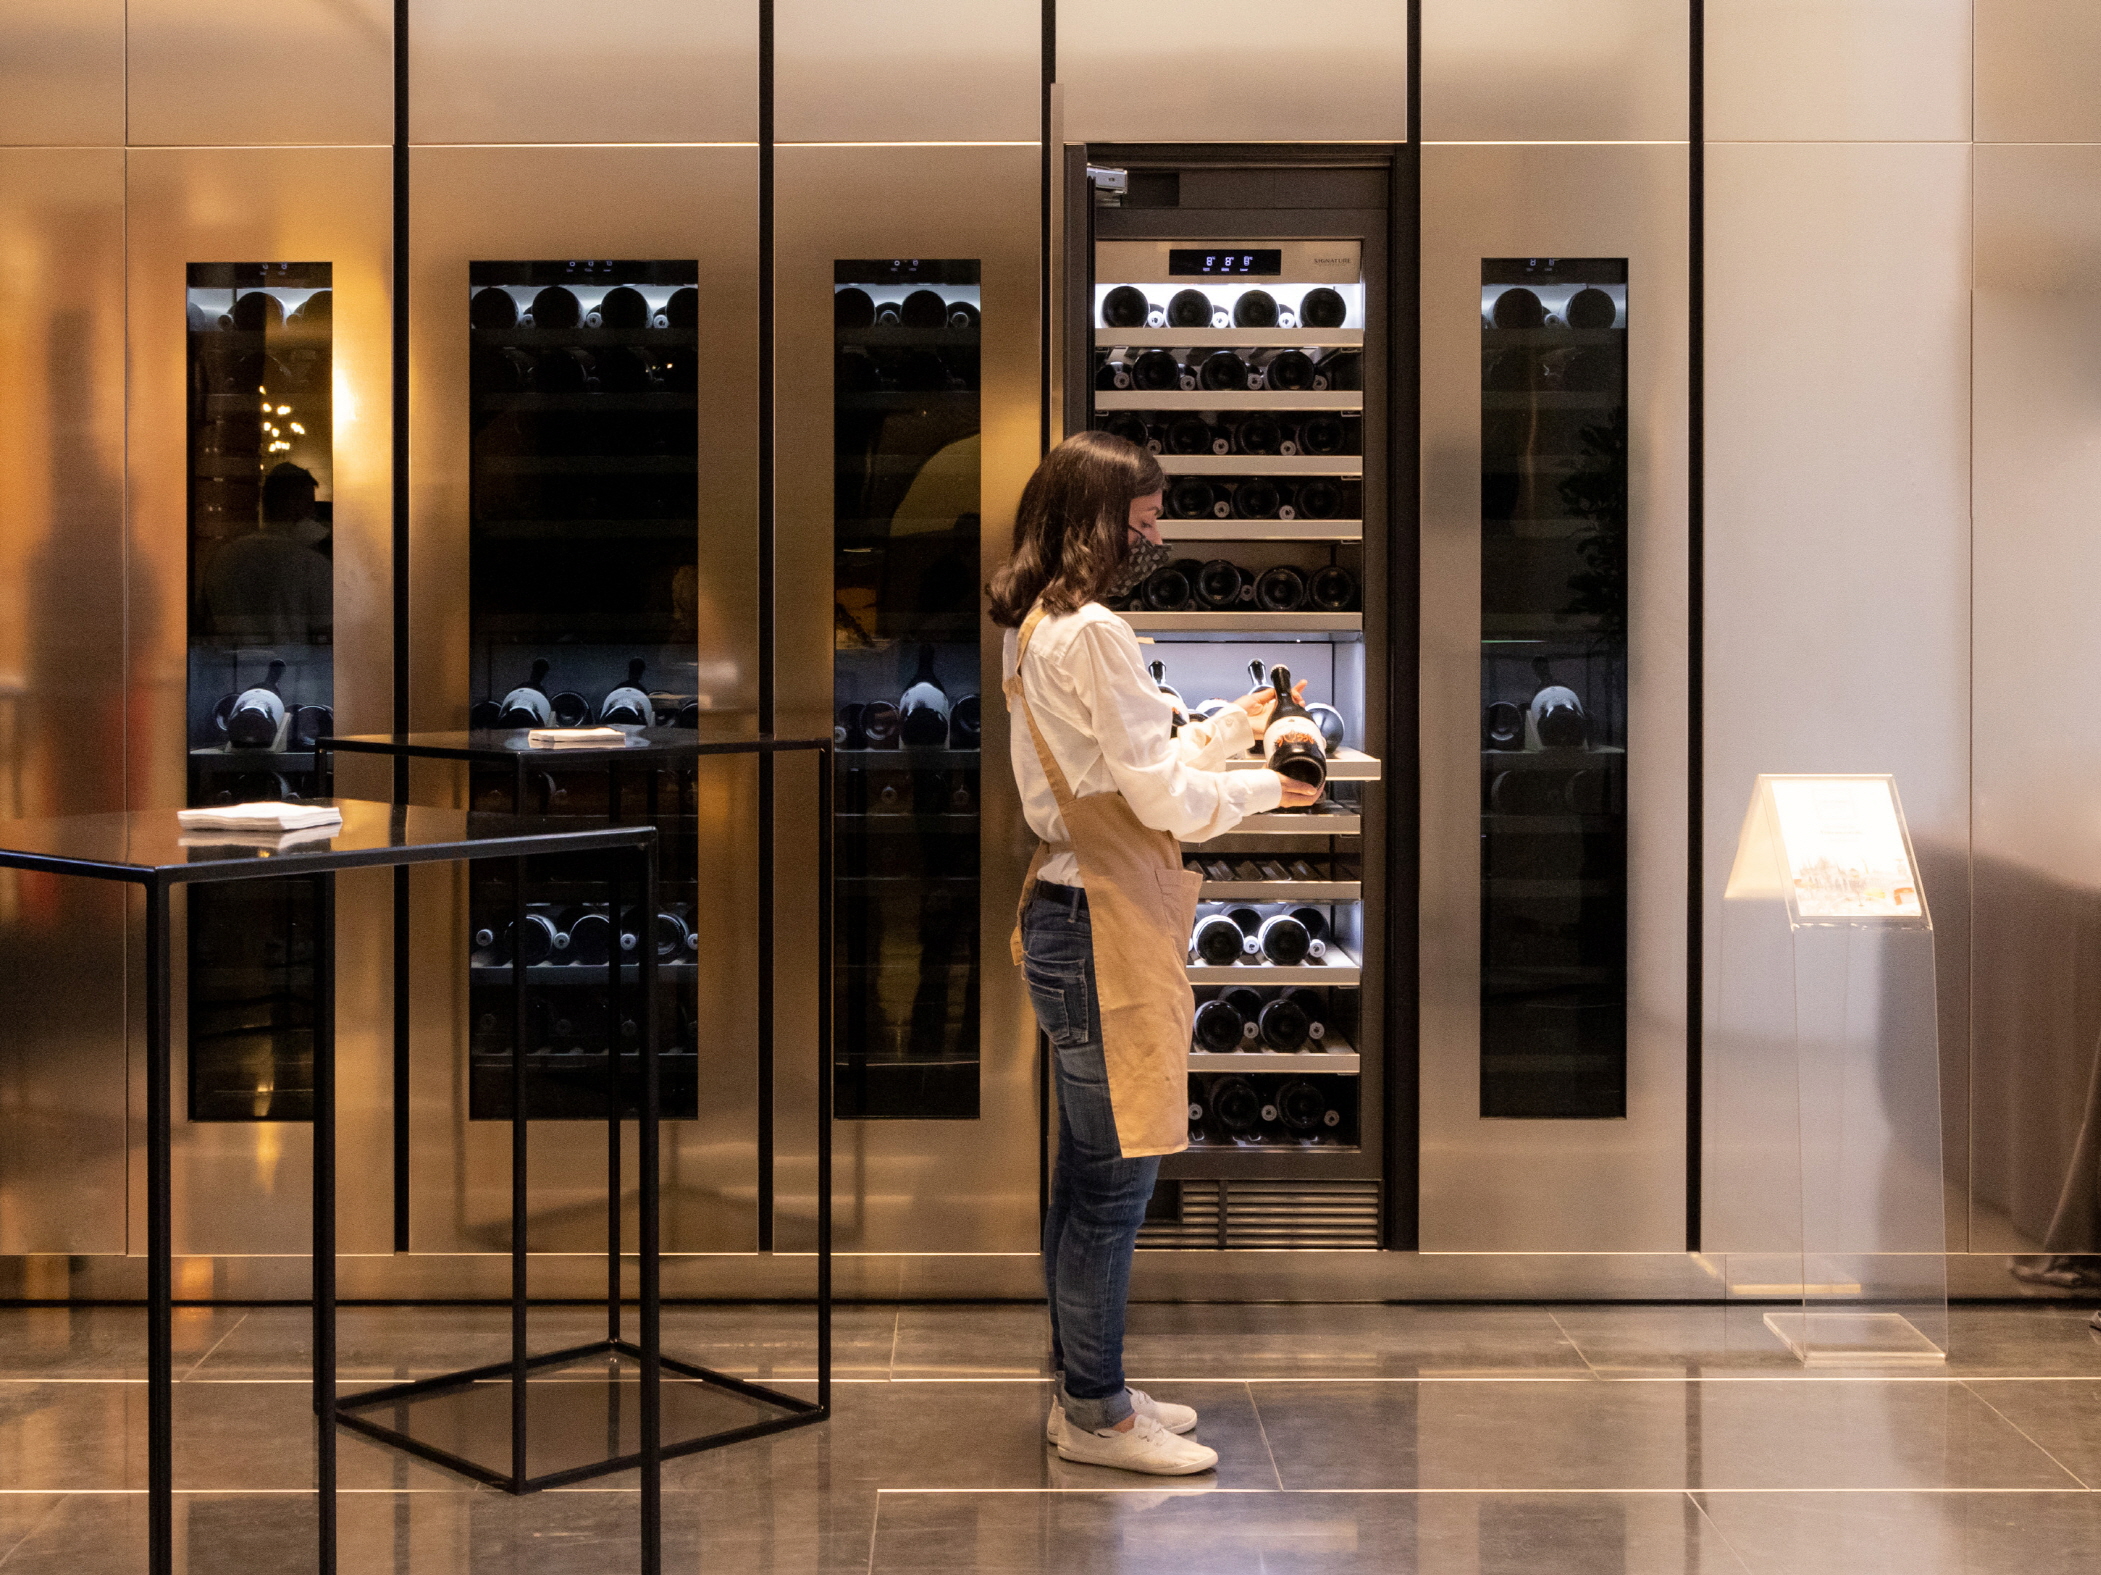 Signature Kitchen Suite Showroom in Piazza Cavour, Milan presents the luxurious offerings